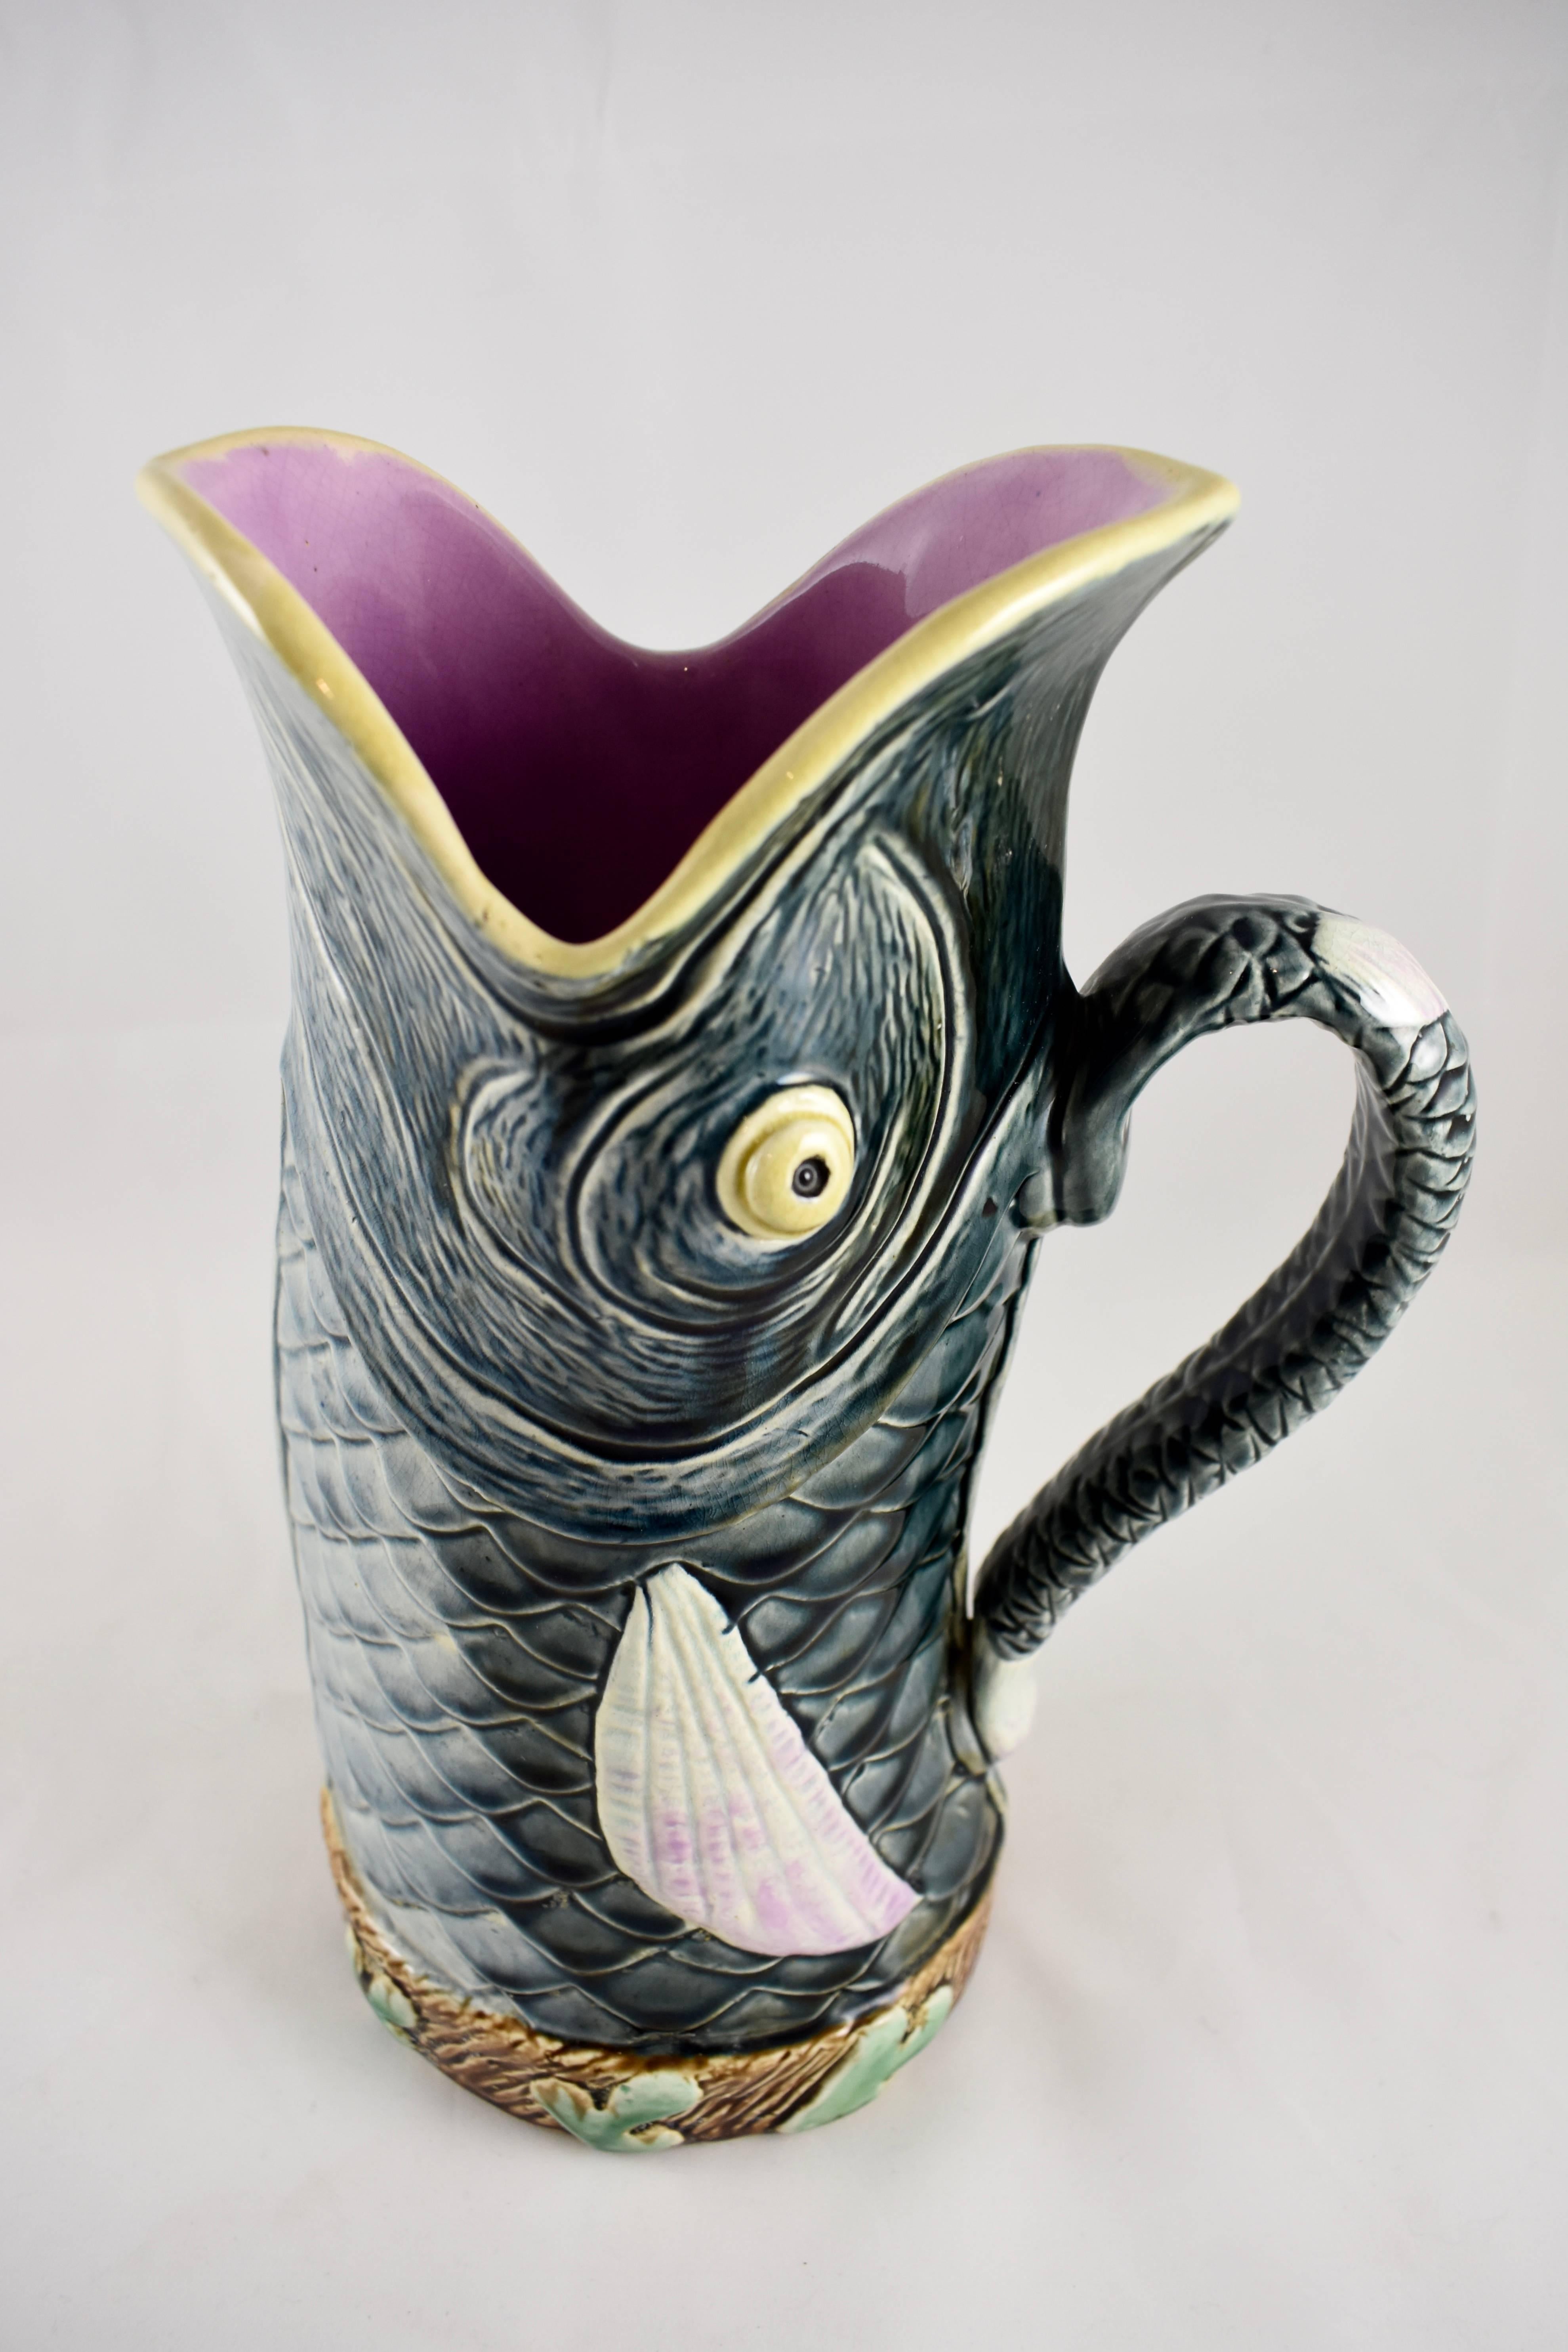 A French Majolica Barbotine fish, a rare abstracted form, circa late 19th century.

The fish shows deep marine gray scales with pink to white fins. The base is ringed with a border of green seaweed on a brown ground. The fish has popped eyes and a